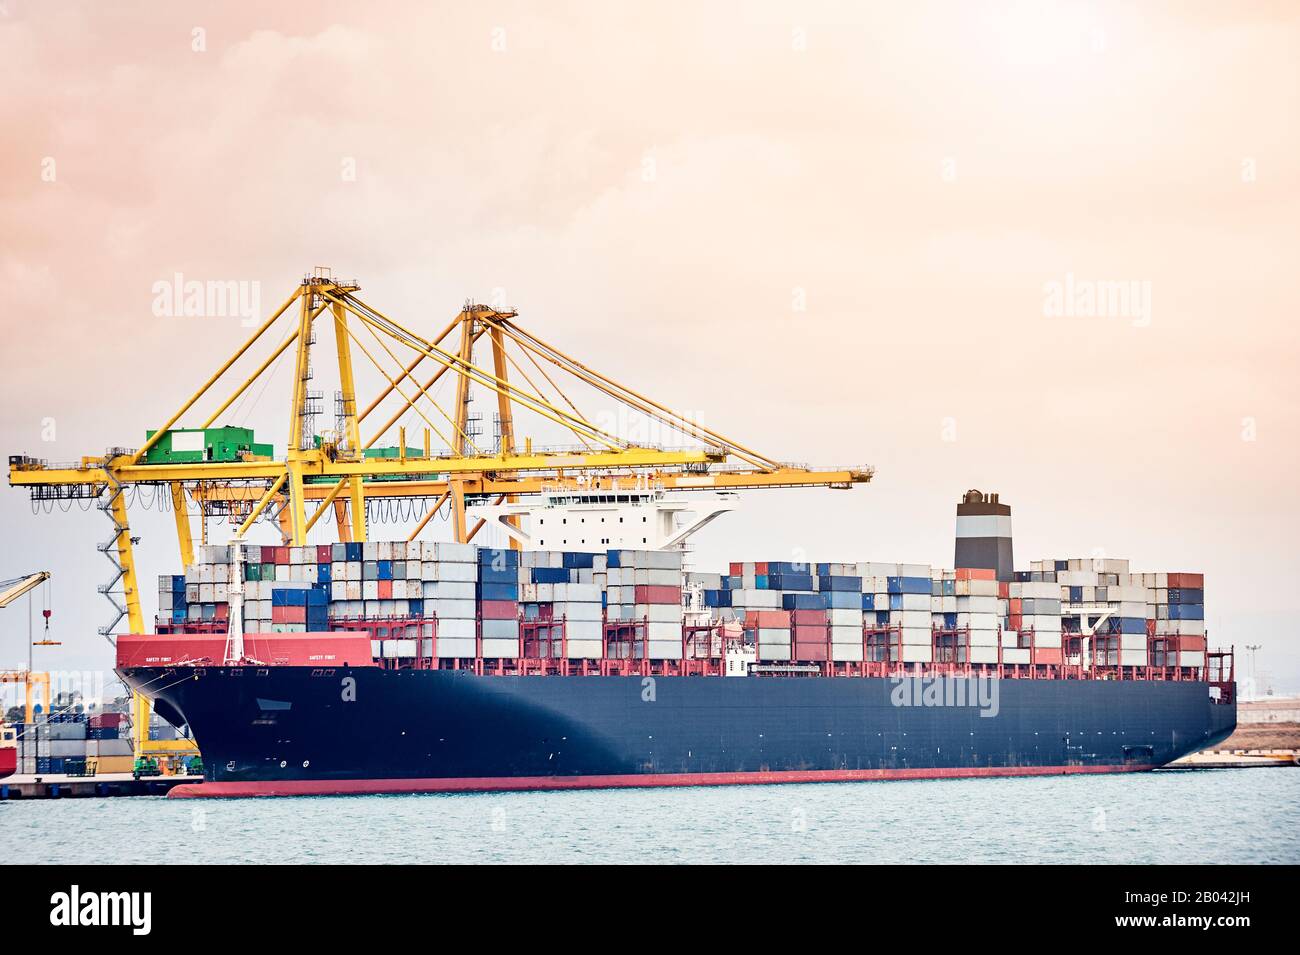 Ship-to-shore cranes loading containers on vessel in harbor enviroment. Transportation industry and shipment logistics. Export and import bussines Stock Photo